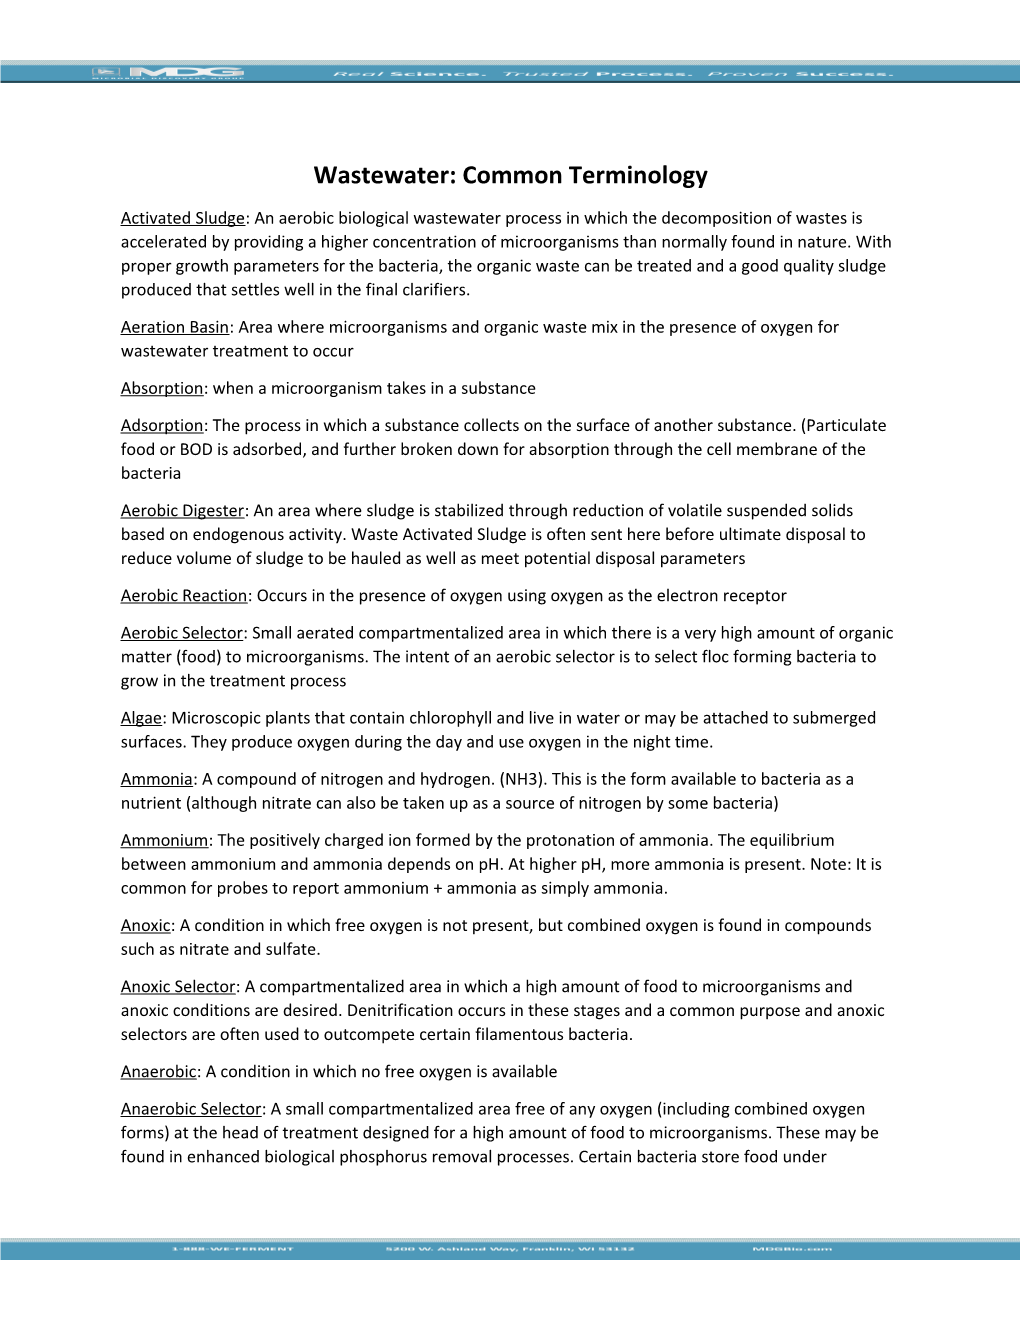 Wastewater: Common Terminology